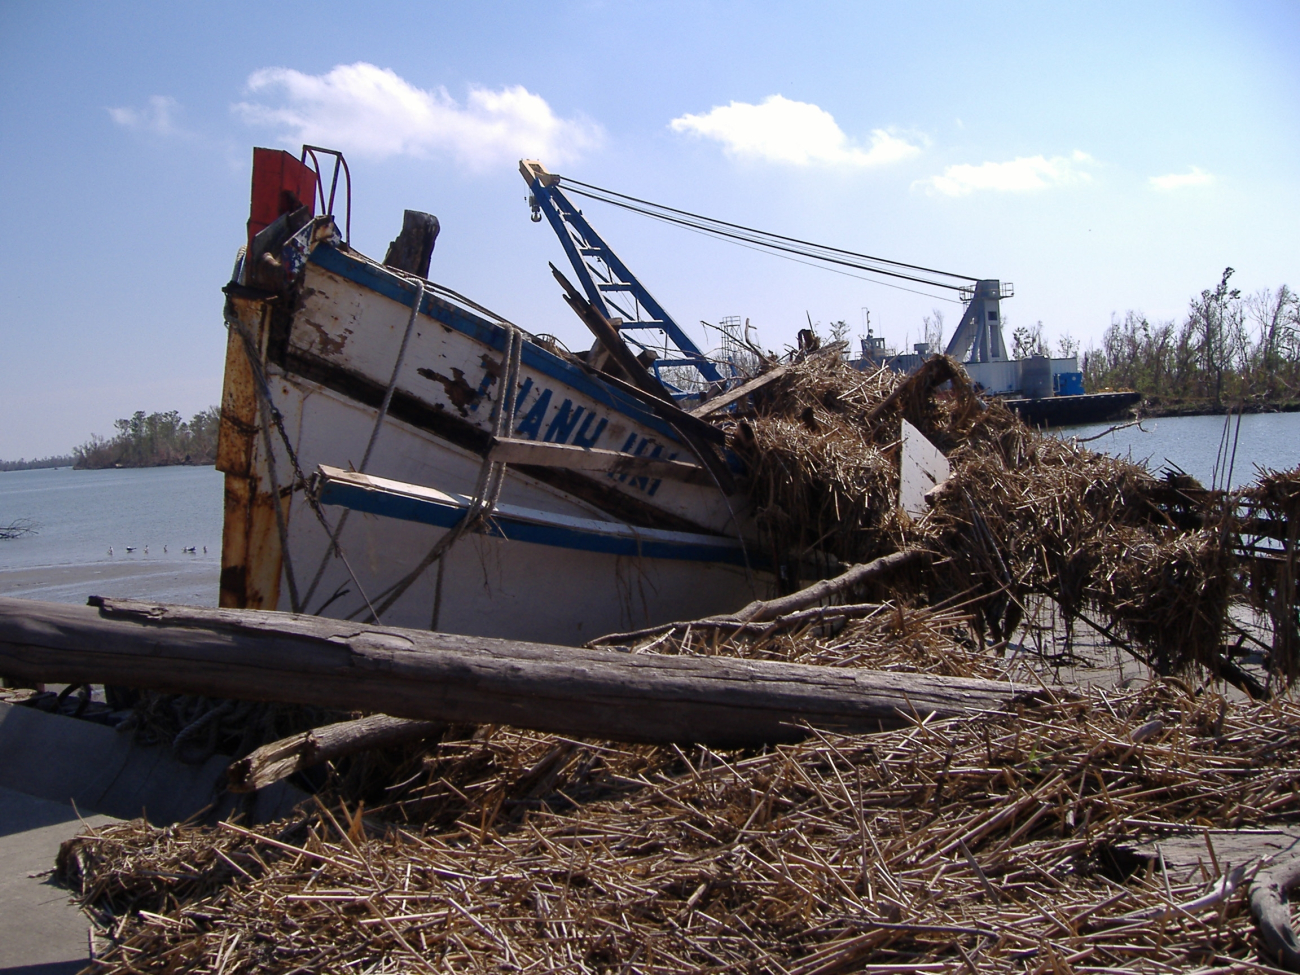 Is this a salvageable boat or just debris?The aftermath of Katrina